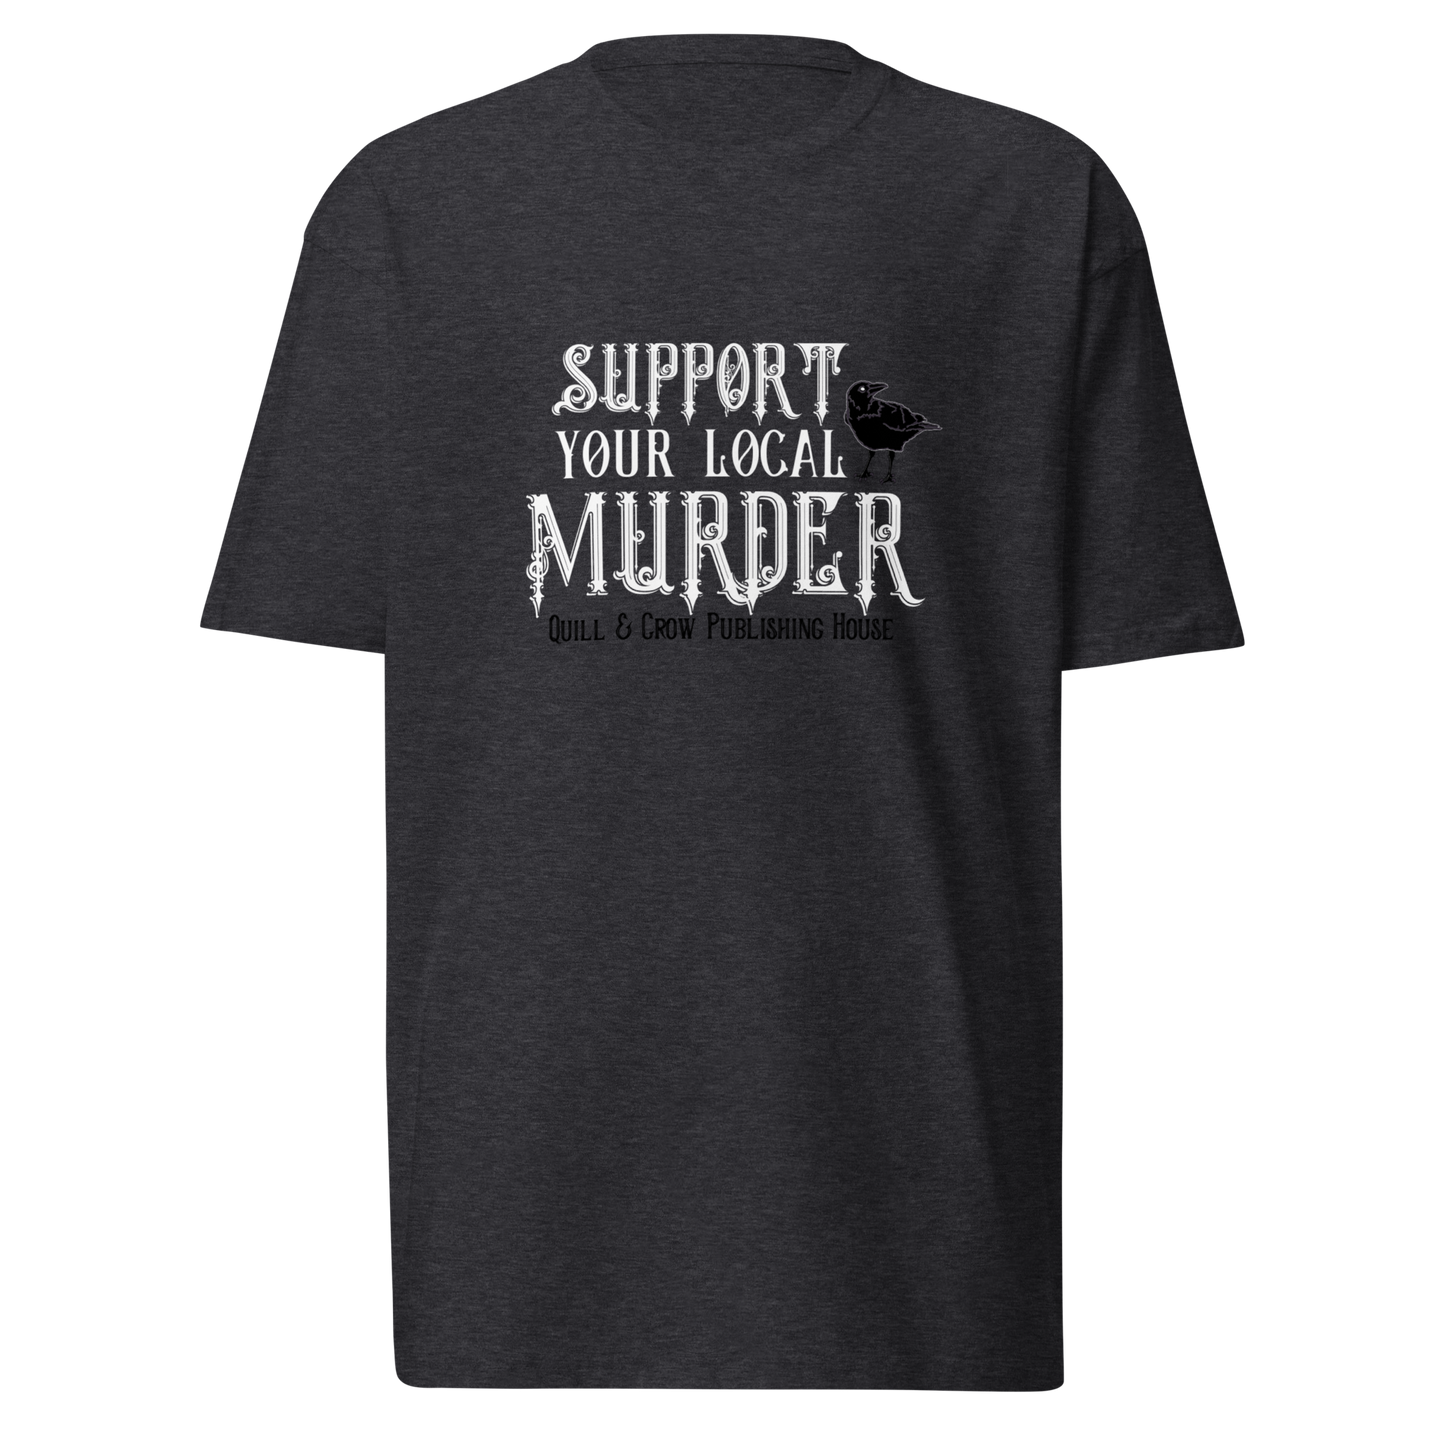 Support Your Local Murder Heavyweight Tee